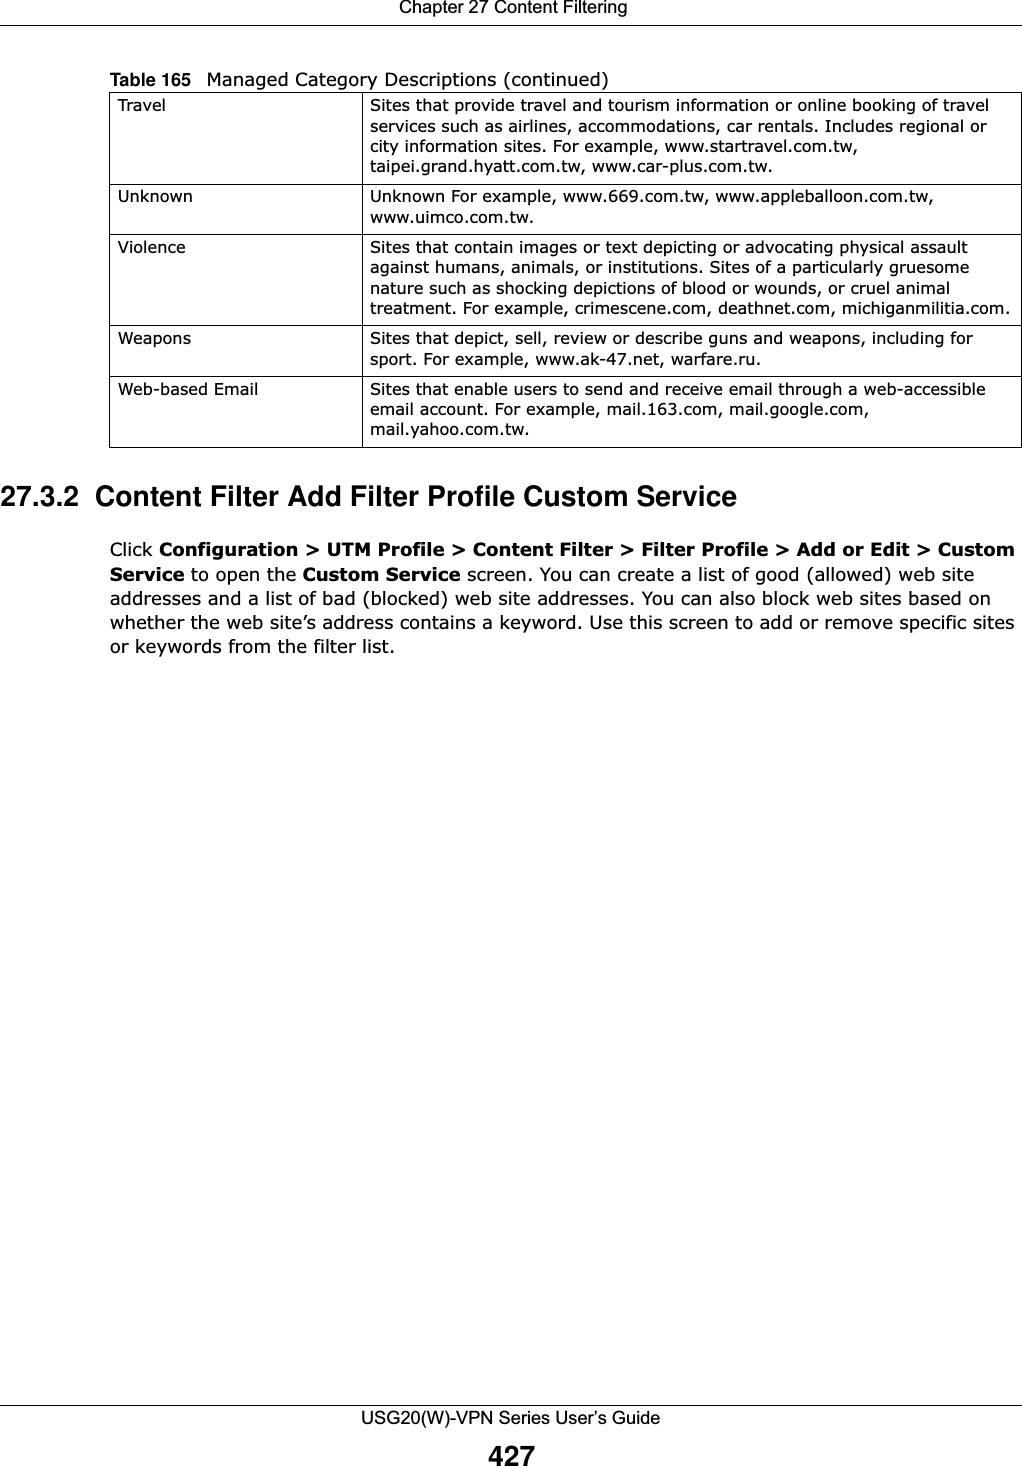  Chapter 27 Content FilteringUSG20(W)-VPN Series User’s Guide42727.3.2  Content Filter Add Filter Profile Custom Service Click Configuration &gt; UTM Profile &gt; Content Filter &gt; Filter Profile &gt; Add or Edit &gt; Custom Service to open the Custom Service screen. You can create a list of good (allowed) web site addresses and a list of bad (blocked) web site addresses. You can also block web sites based on whether the web site’s address contains a keyword. Use this screen to add or remove specific sites or keywords from the filter list.Travel Sites that provide travel and tourism information or online booking of travel services such as airlines, accommodations, car rentals. Includes regional or city information sites. For example, www.startravel.com.tw, taipei.grand.hyatt.com.tw, www.car-plus.com.tw.Unknown Unknown For example, www.669.com.tw, www.appleballoon.com.tw, www.uimco.com.tw.Violence Sites that contain images or text depicting or advocating physical assault against humans, animals, or institutions. Sites of a particularly gruesome nature such as shocking depictions of blood or wounds, or cruel animal treatment. For example, crimescene.com, deathnet.com, michiganmilitia.com.Weapons Sites that depict, sell, review or describe guns and weapons, including for sport. For example, www.ak-47.net, warfare.ru.Web-based Email Sites that enable users to send and receive email through a web-accessible email account. For example, mail.163.com, mail.google.com, mail.yahoo.com.tw.Table 165   Managed Category Descriptions (continued)